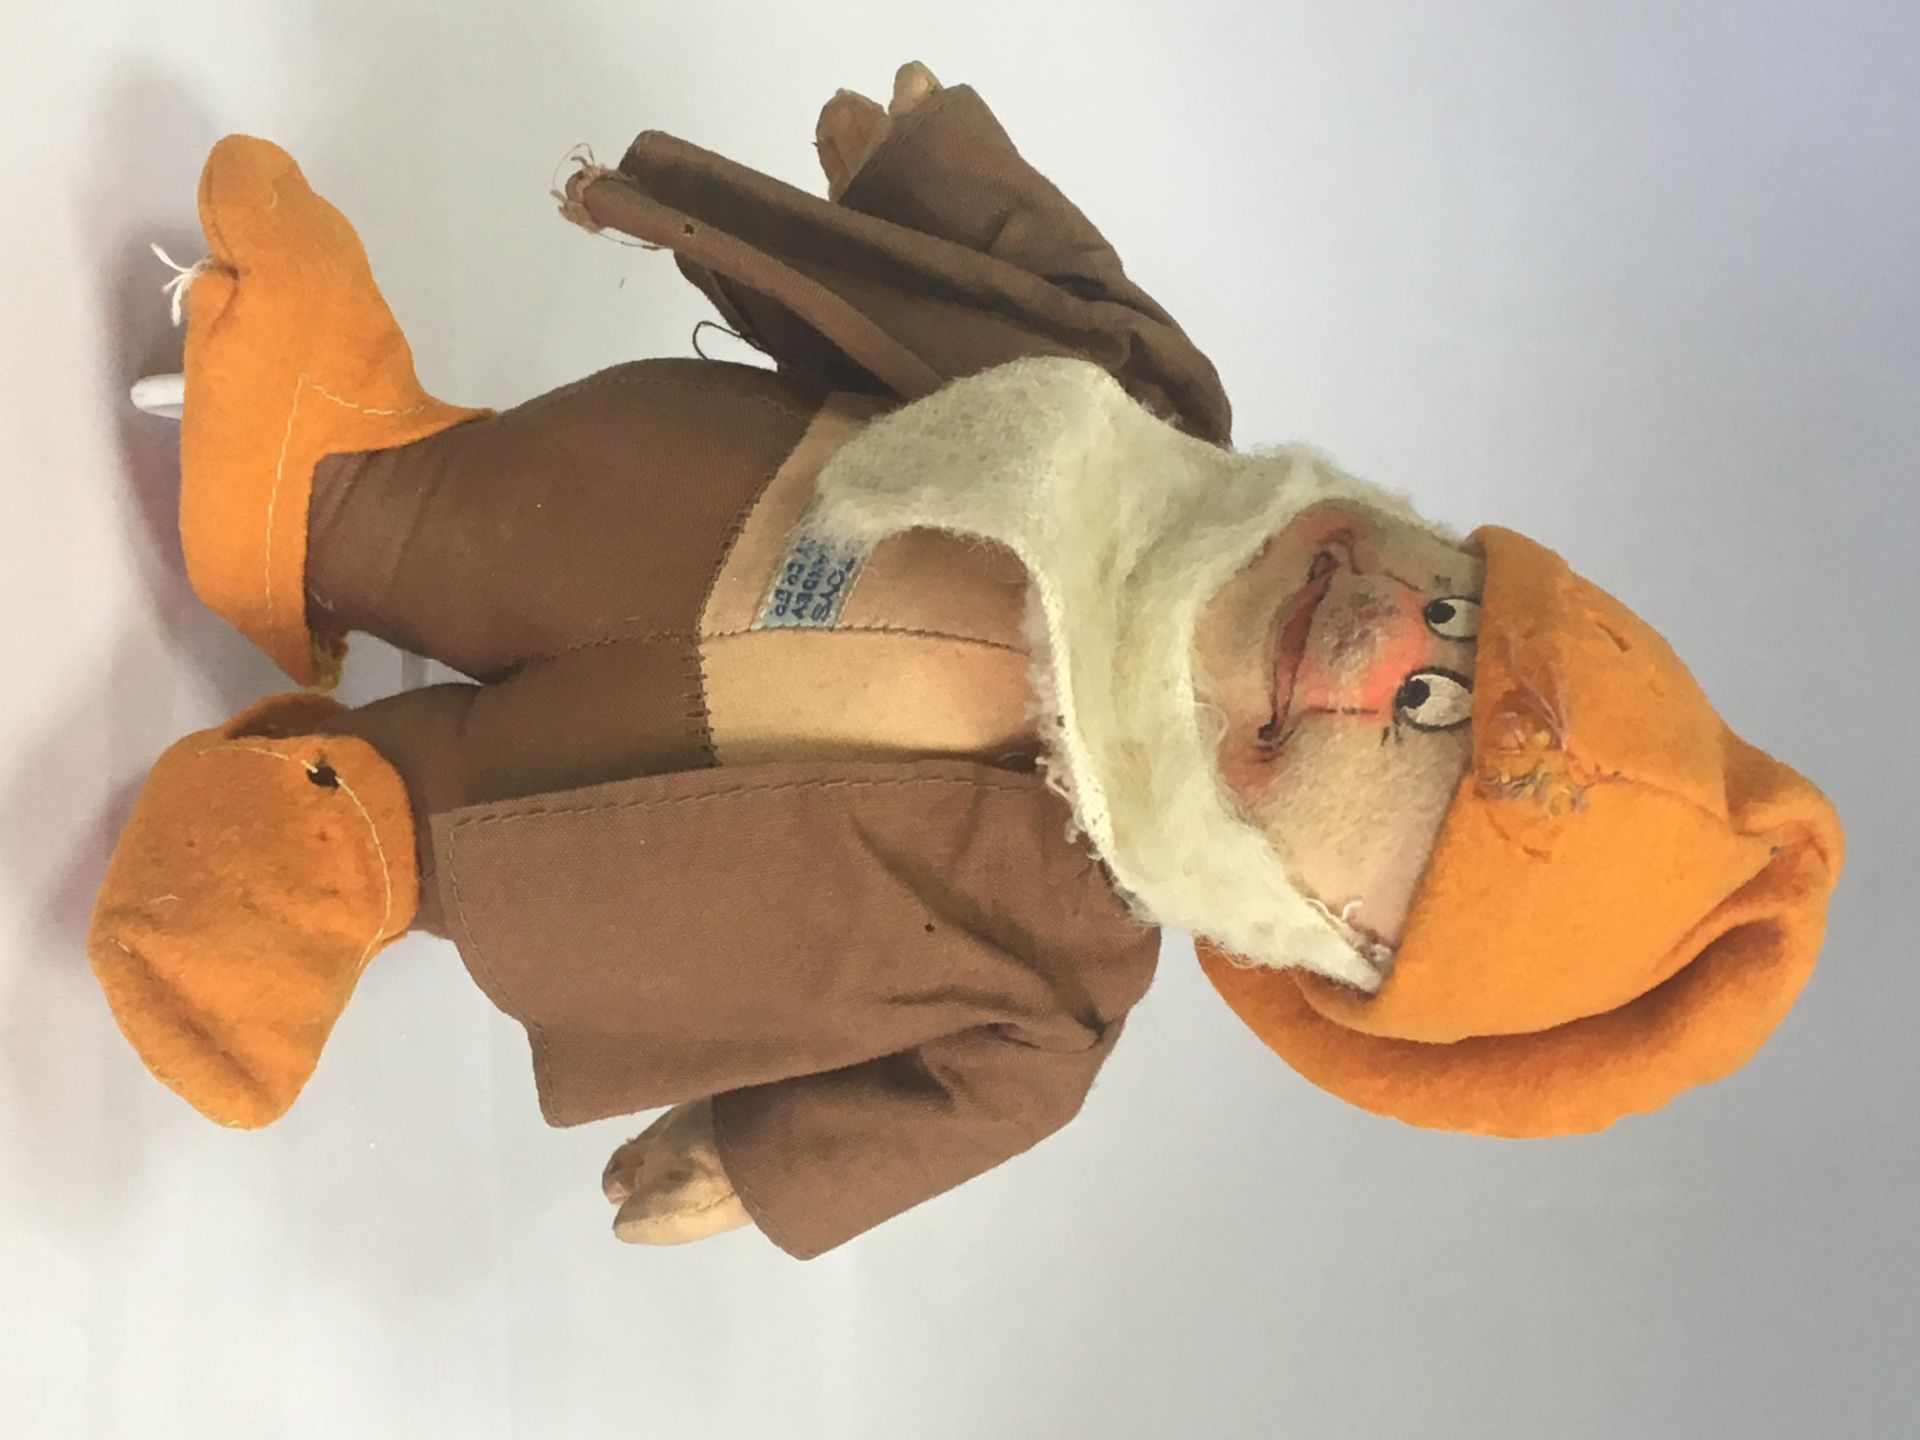 VINTAGE CHAD VALLEY DWARF - GRUMPY - C. 1930s. WITH ORIGINAL LABEL, MOULDED AND PAINTED FELT FACE,